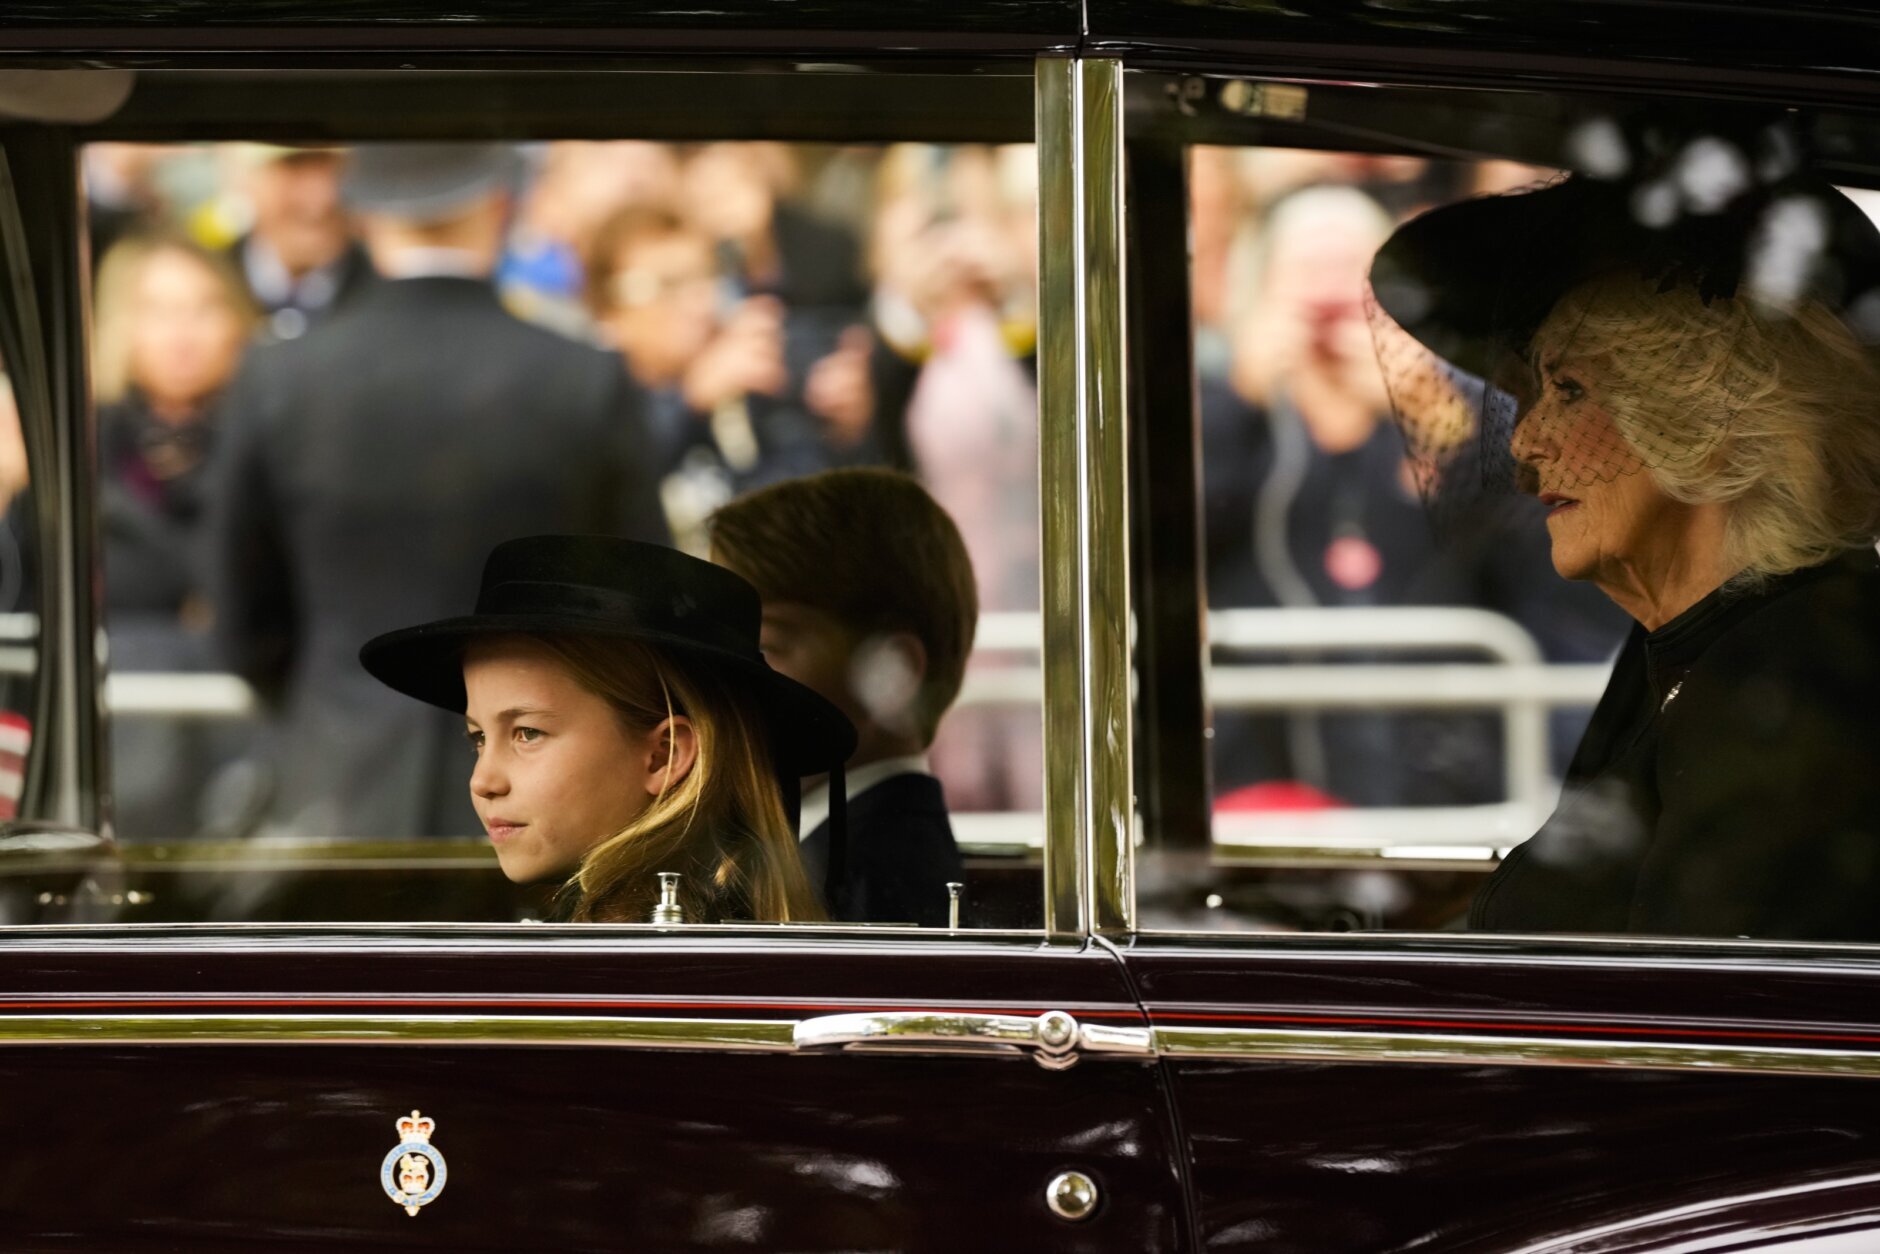 Britain's Prince Charlotte, left, Prince George, background, and Camilla, the Queen Consort, right, arrive by car ahead of the Queen Elizabeth II funeral in central London, Monday, Sept. 19, 2022. The Queen, who died aged 96 on Sept. 8, will be buried at Windsor alongside her late husband, Prince Philip, who died last year. (AP Photo/Andreea Alexandru, Pool)